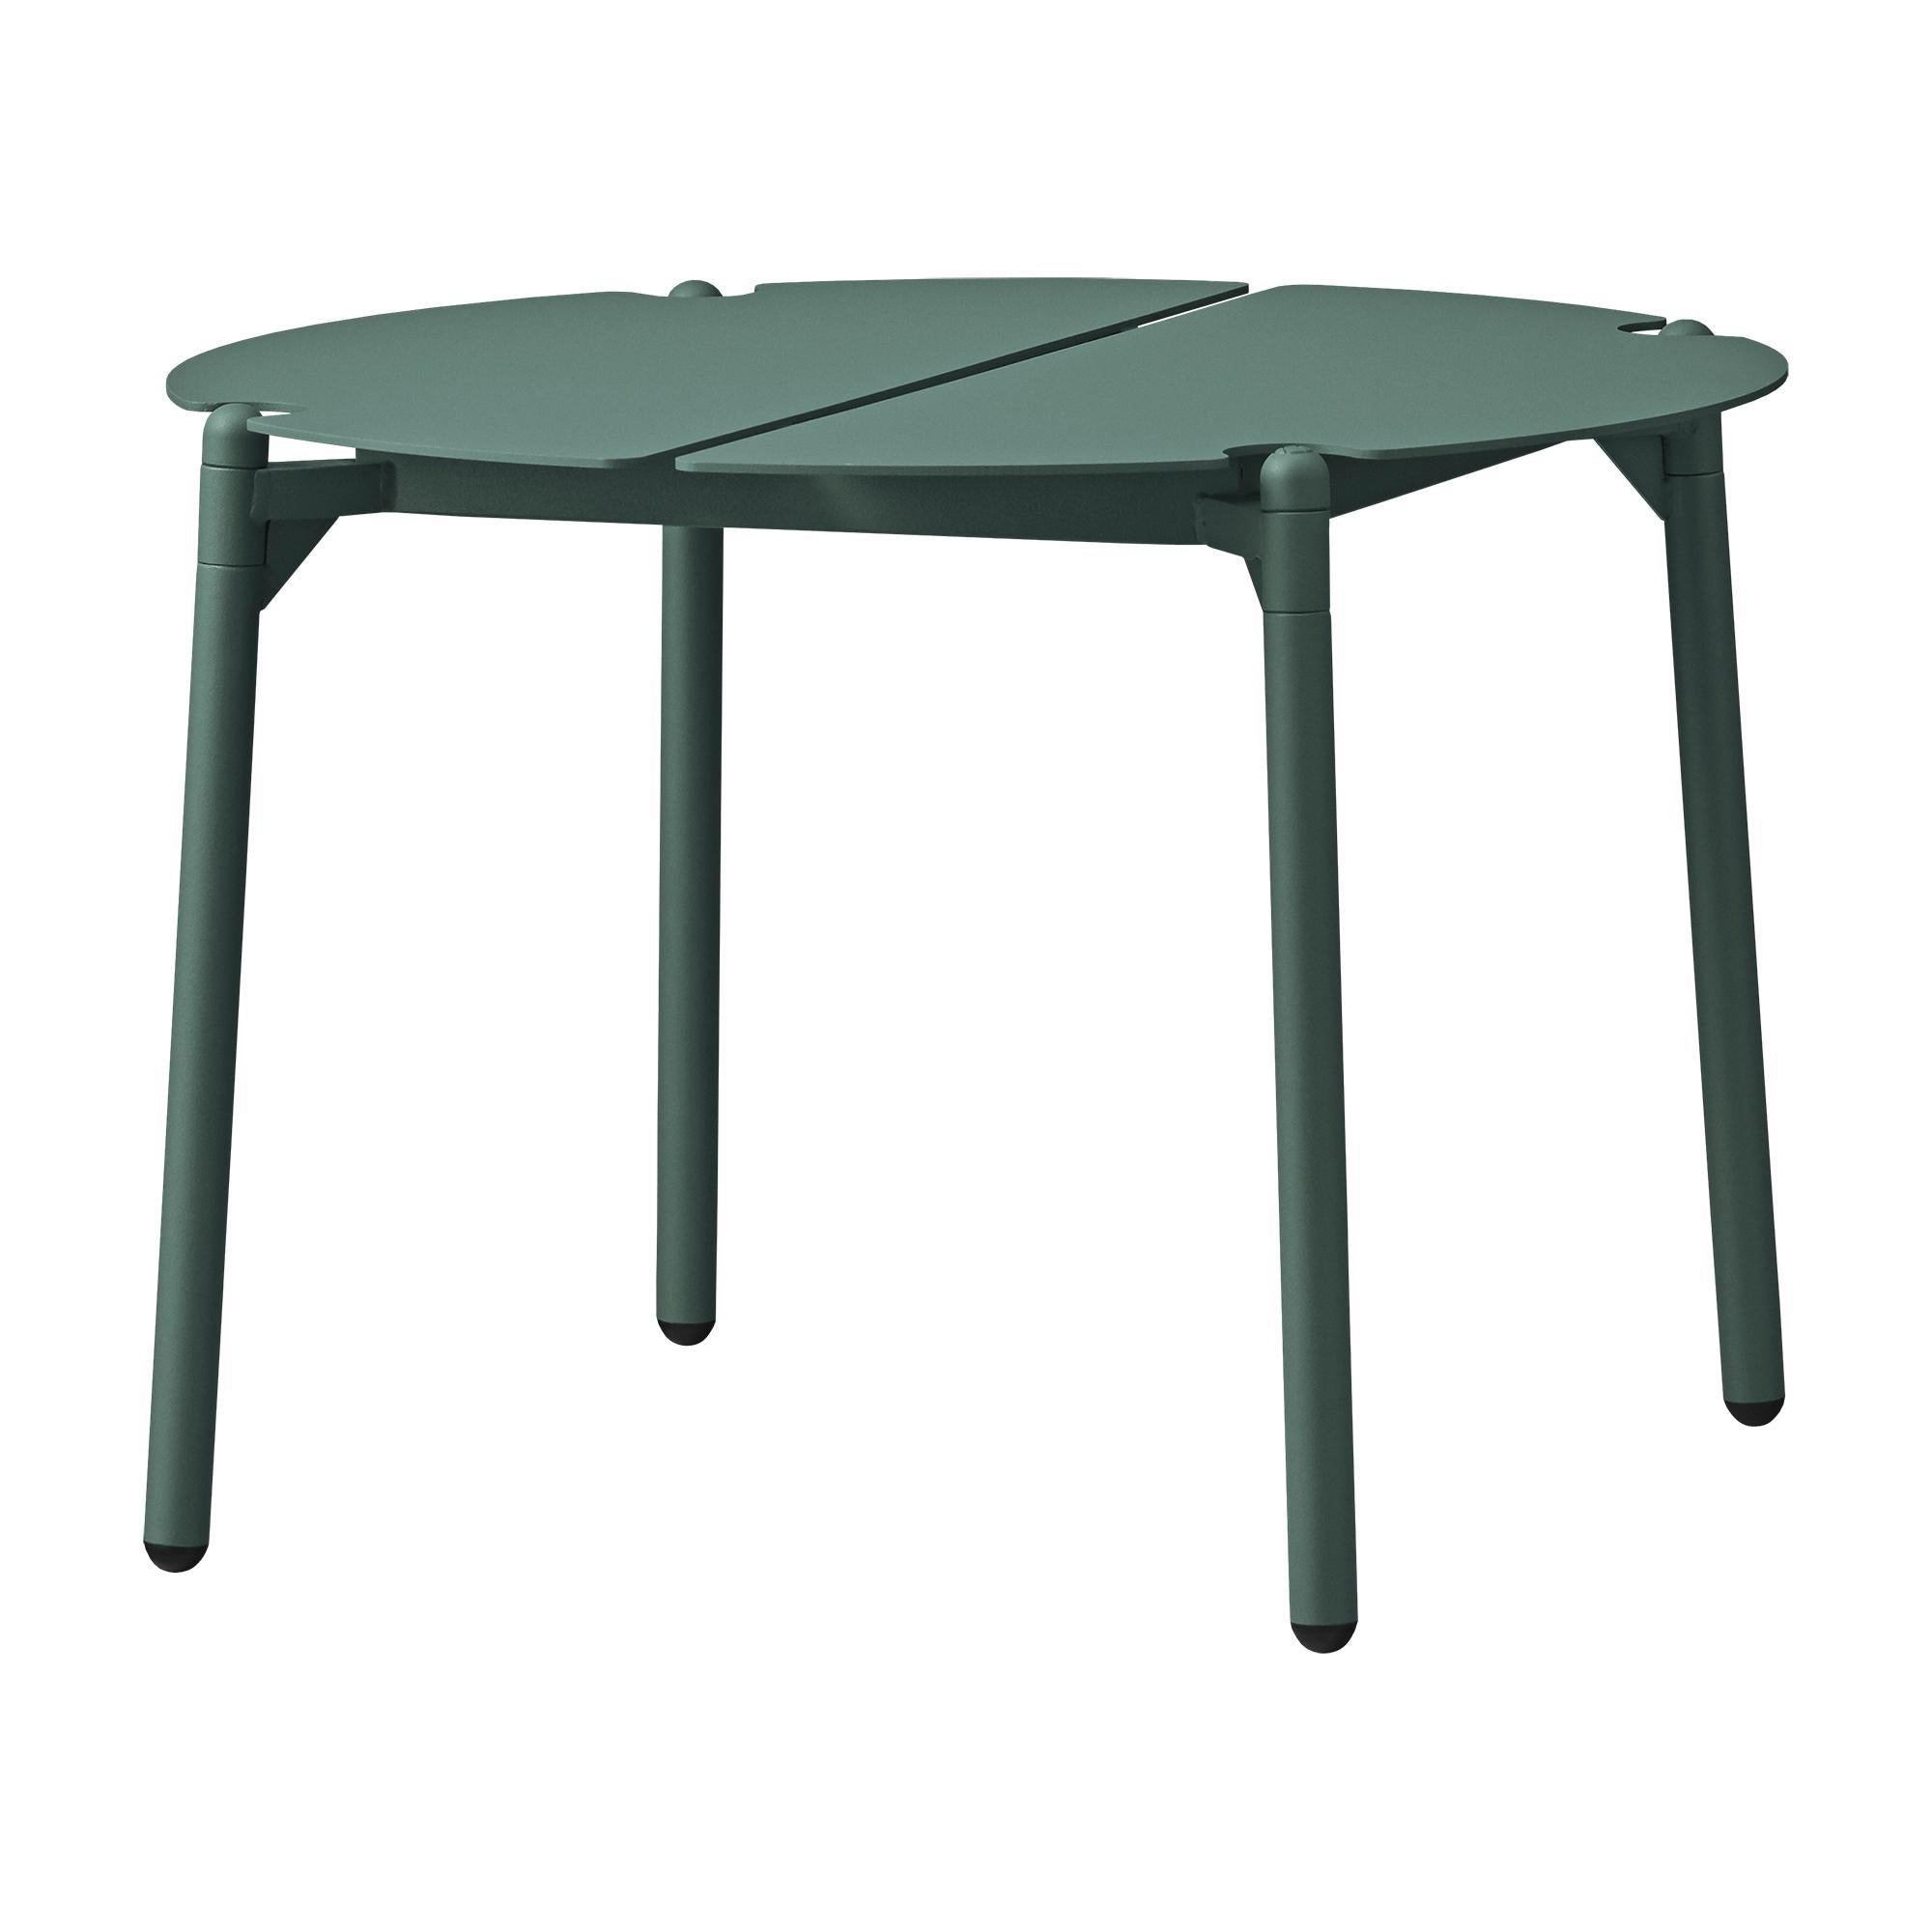 Small Forest Minimalist lounge table
Dimensions: Diameter 50 x H 35 cm 
Materials: Steel w. Matte Powder Coating & Aluminum w. Matte Powder Coating.
Available in colors: Taupe, Bordeaux, Forest, Ginger Bread, Black and, Black and Gold. 

Place the